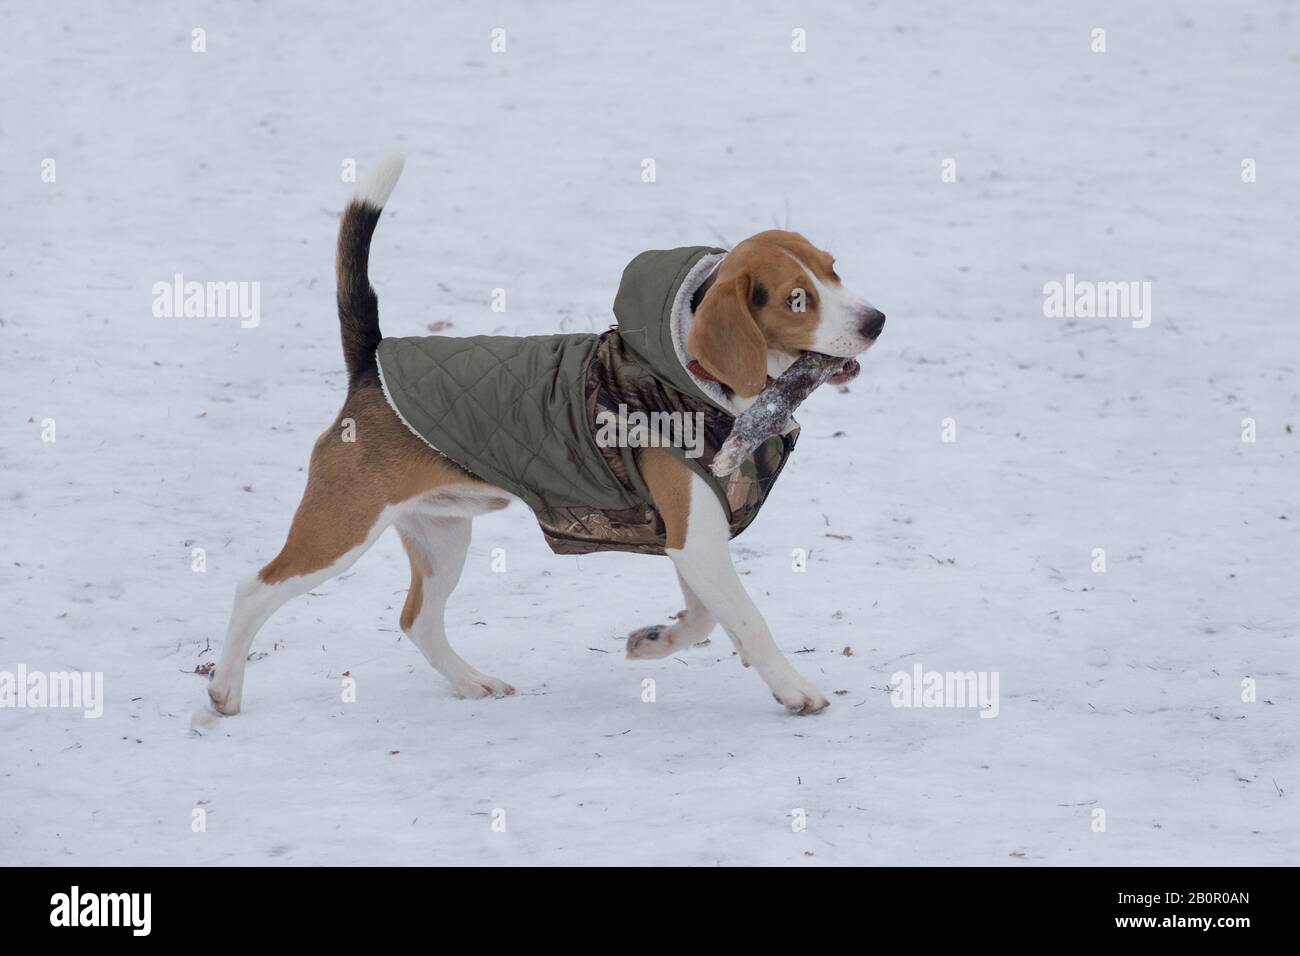 Cute english beagle puppy is running with a wooden stick in his teeth. Pet animals. Purebred dog. Stock Photo